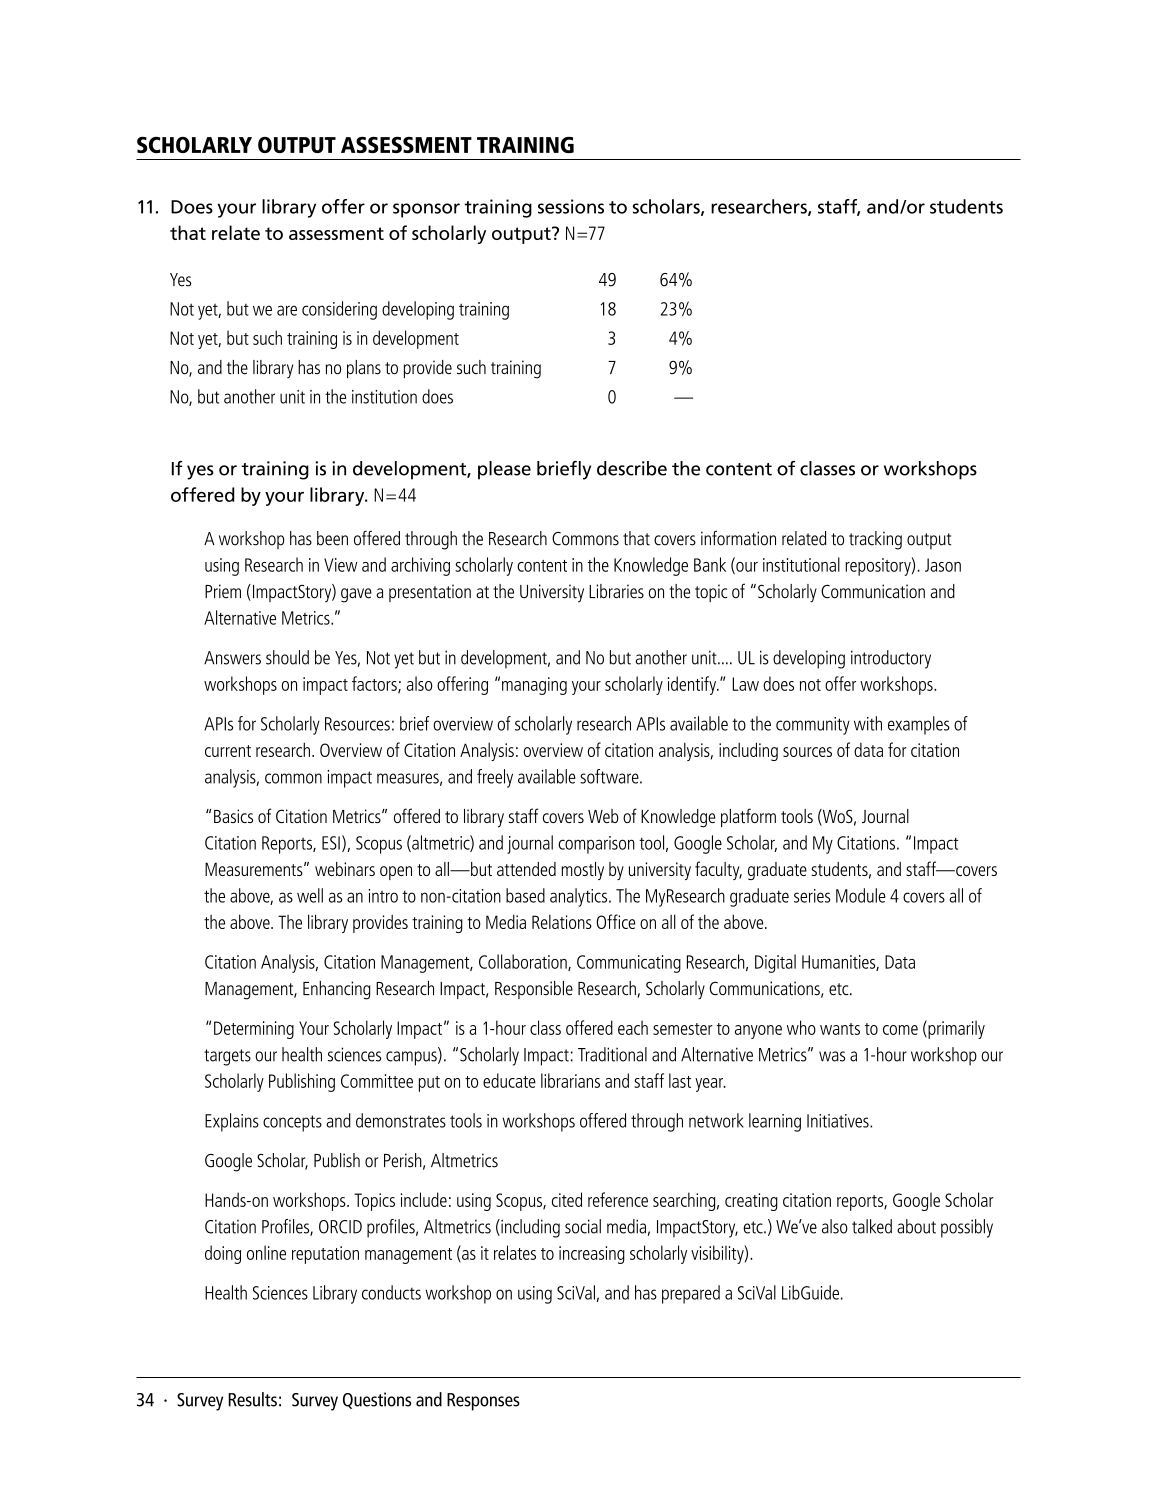 SPEC Kit 346: Scholarly Output Assessment Activities (May 2015) page 34